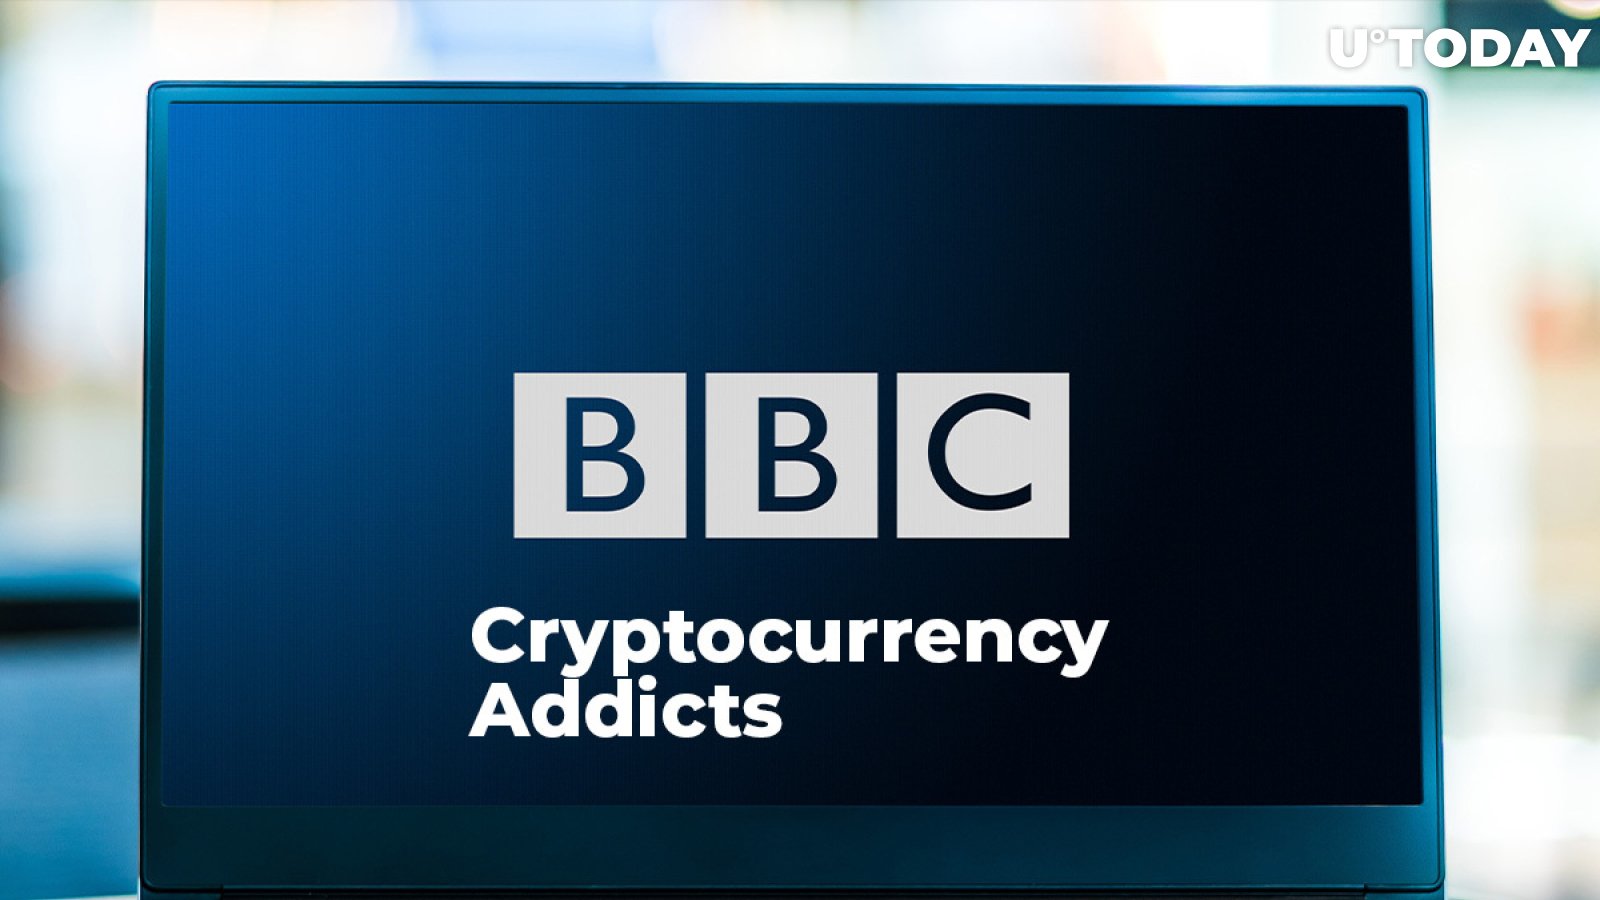 BBC to Air Episode About U.K.'s Only Clinic for Cryptocurrency Addicts